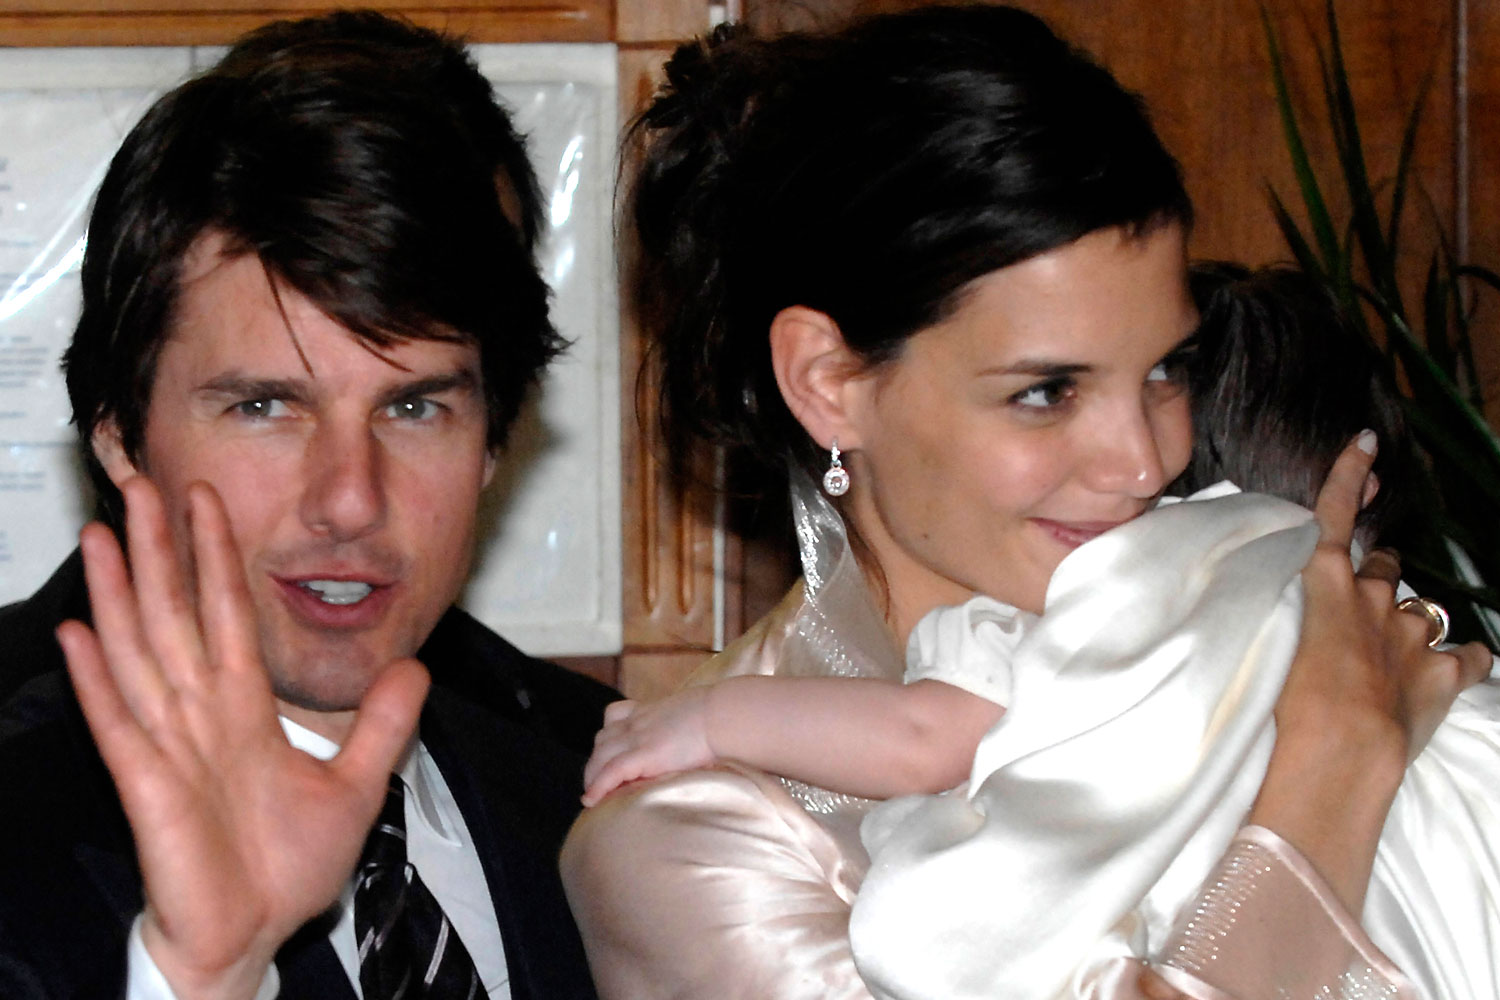 Tom Cruise and Katie Holmes pre wedding dinner at Nino's restaurant in Rome